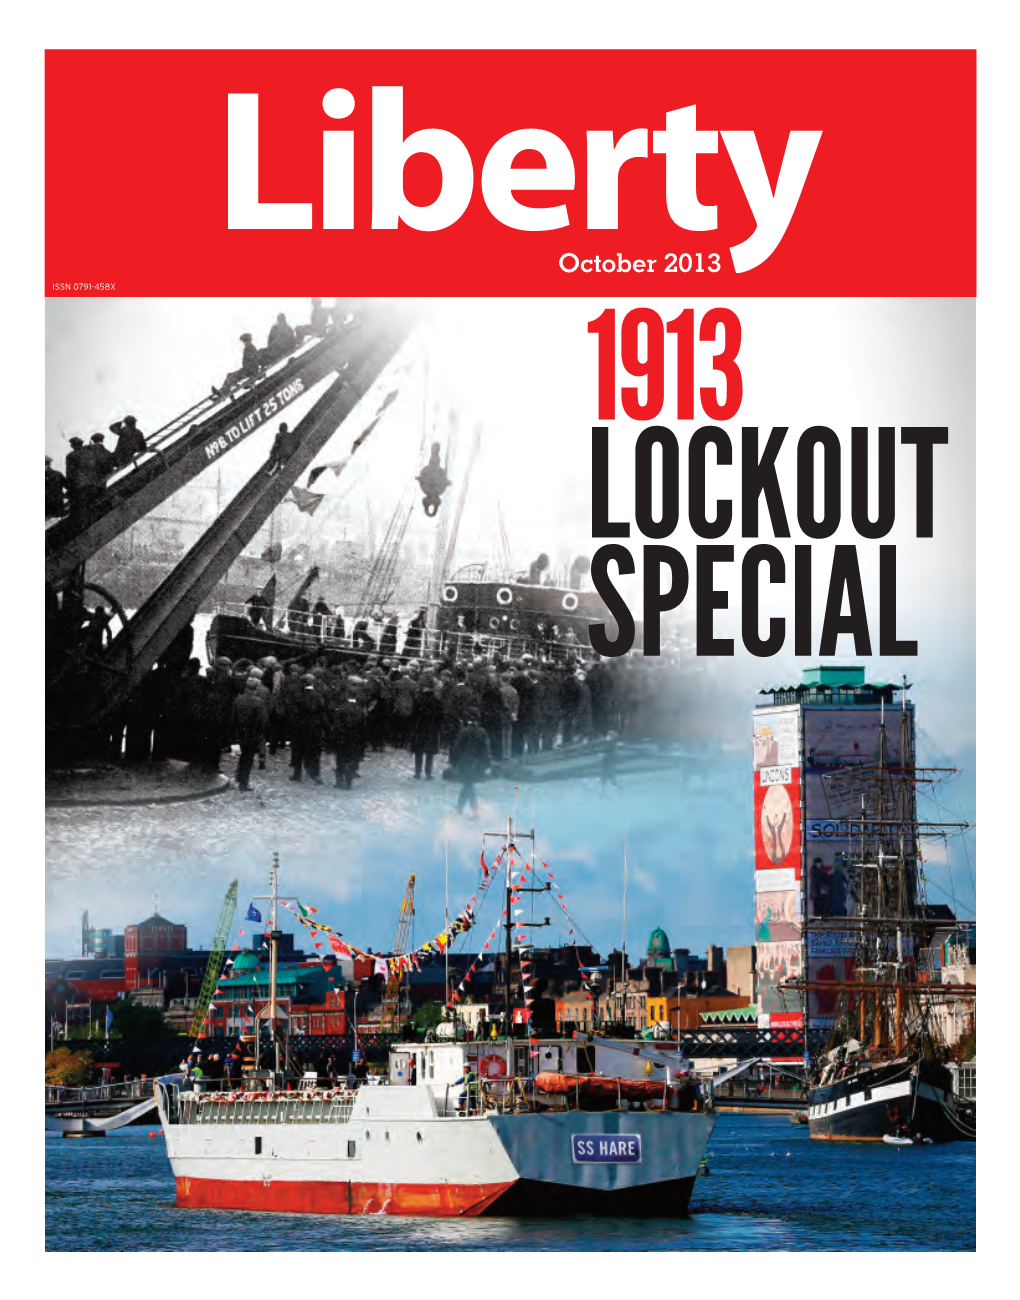 1913 LOCKOUT SPECIAL 2 Liberty • 1913 Lockout Special